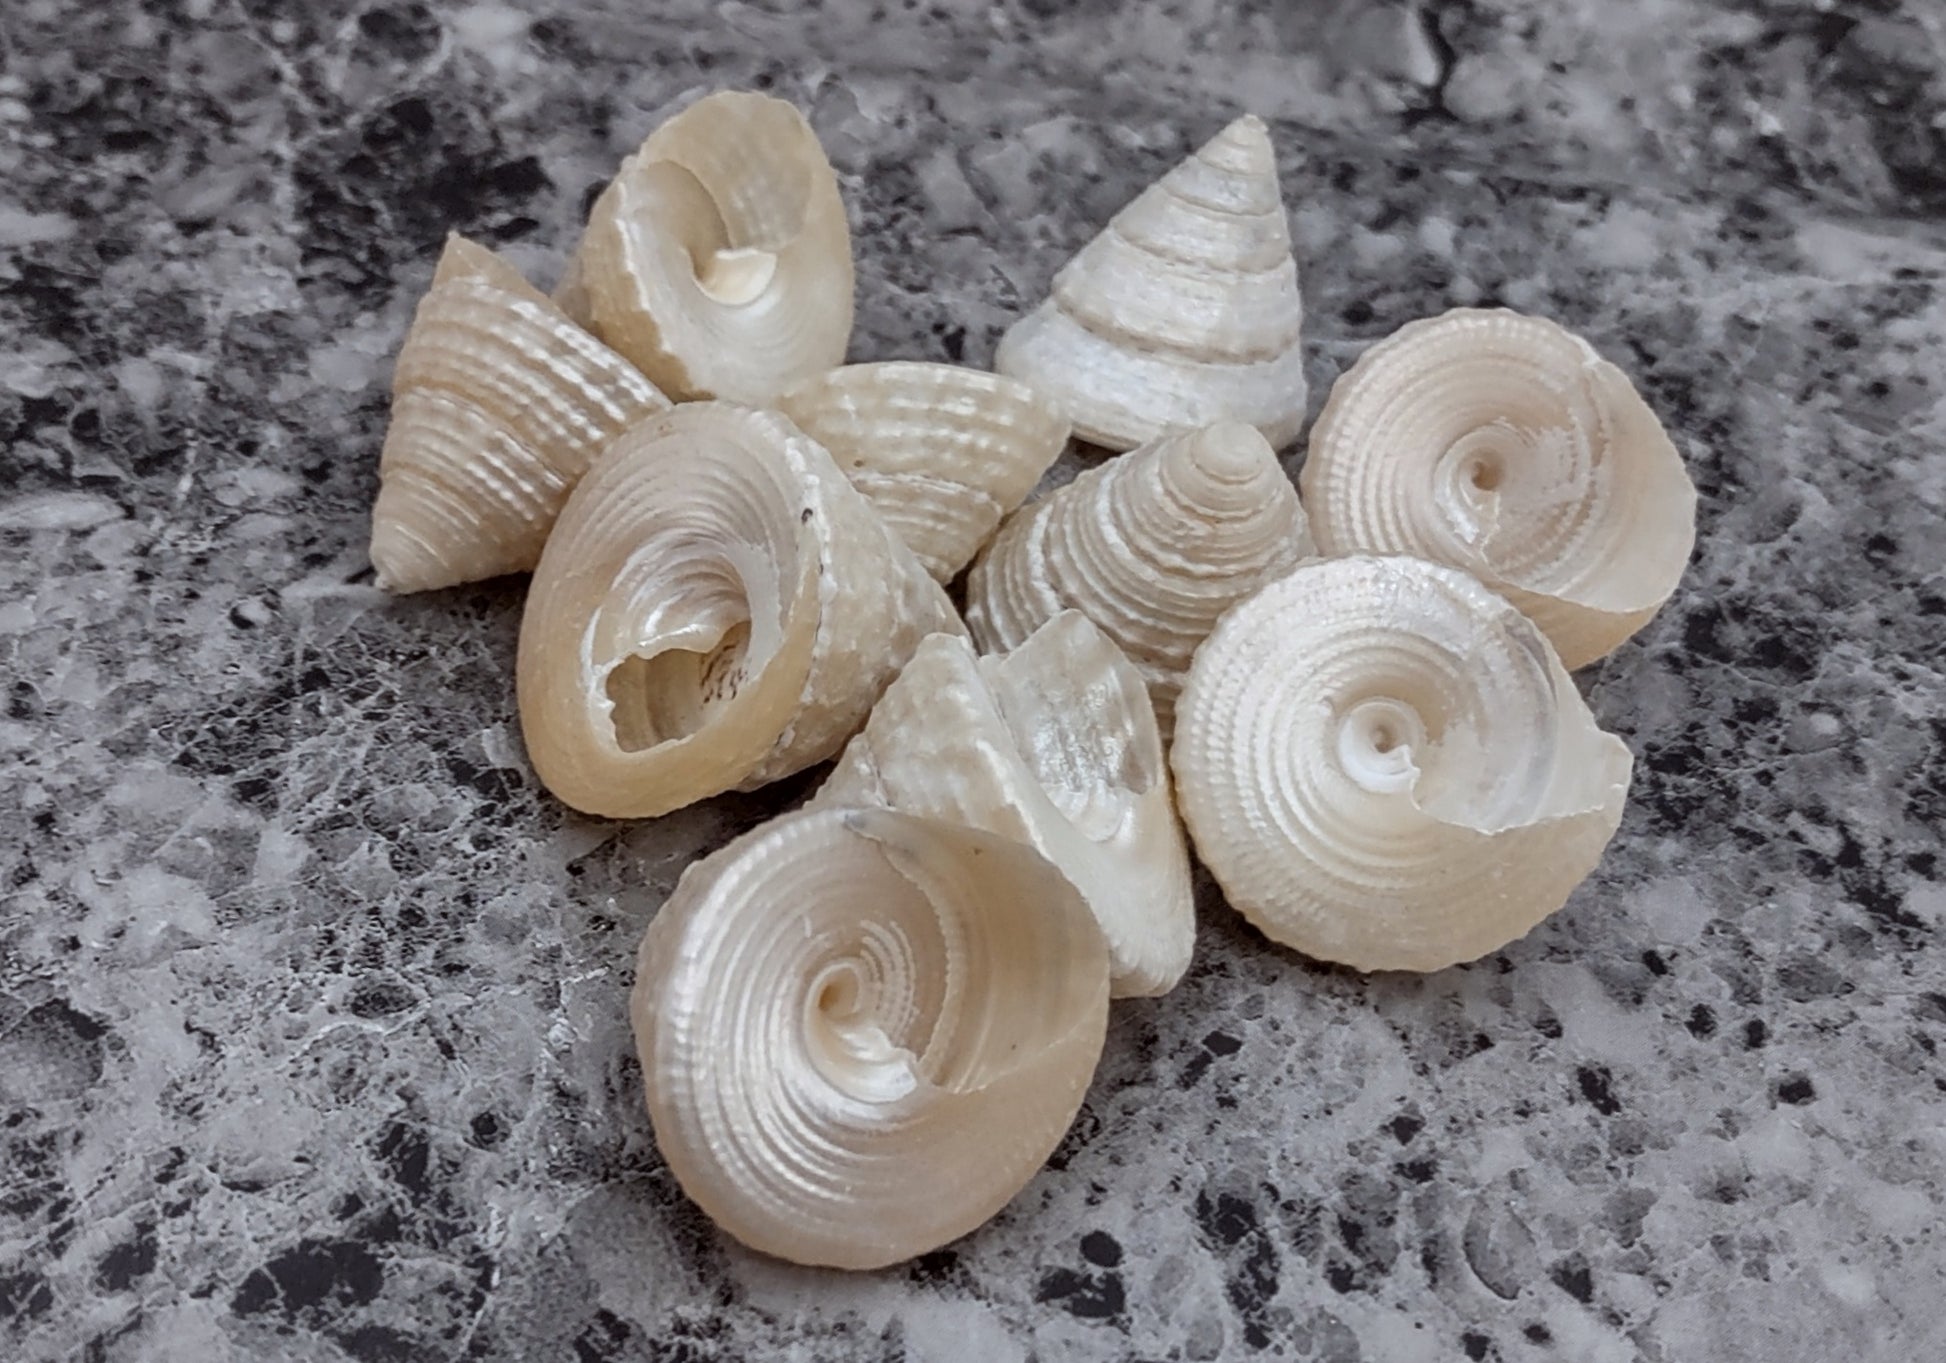 Tiny Venetian Pearl Trochus Seashells (approx. 350+ shells .125-.25 inches)  Perfect Small Shells for art projects, crafts & display filler!